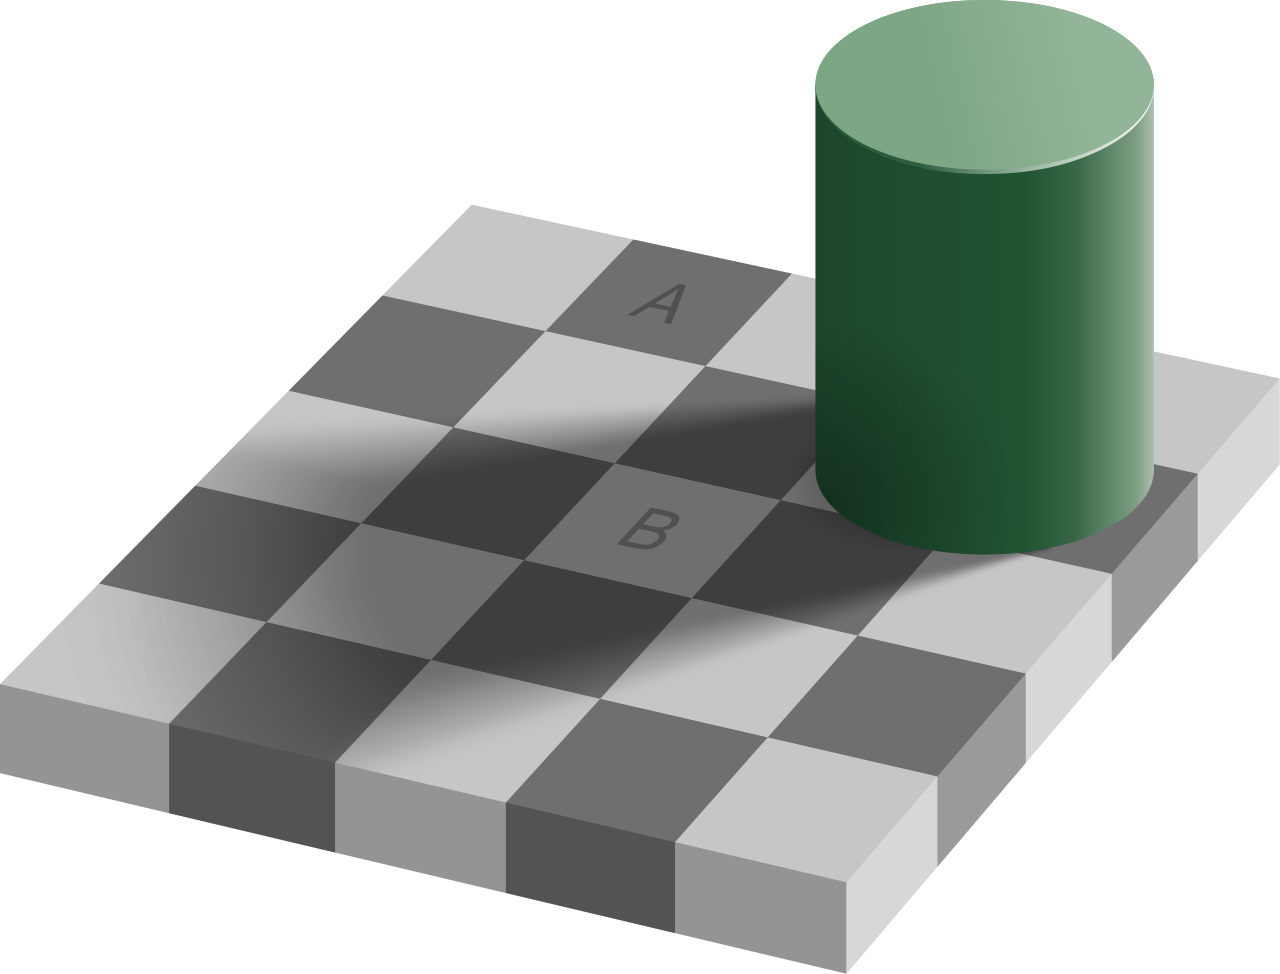 Adelson's Checker-Shadow Illusion, see text surrounding image